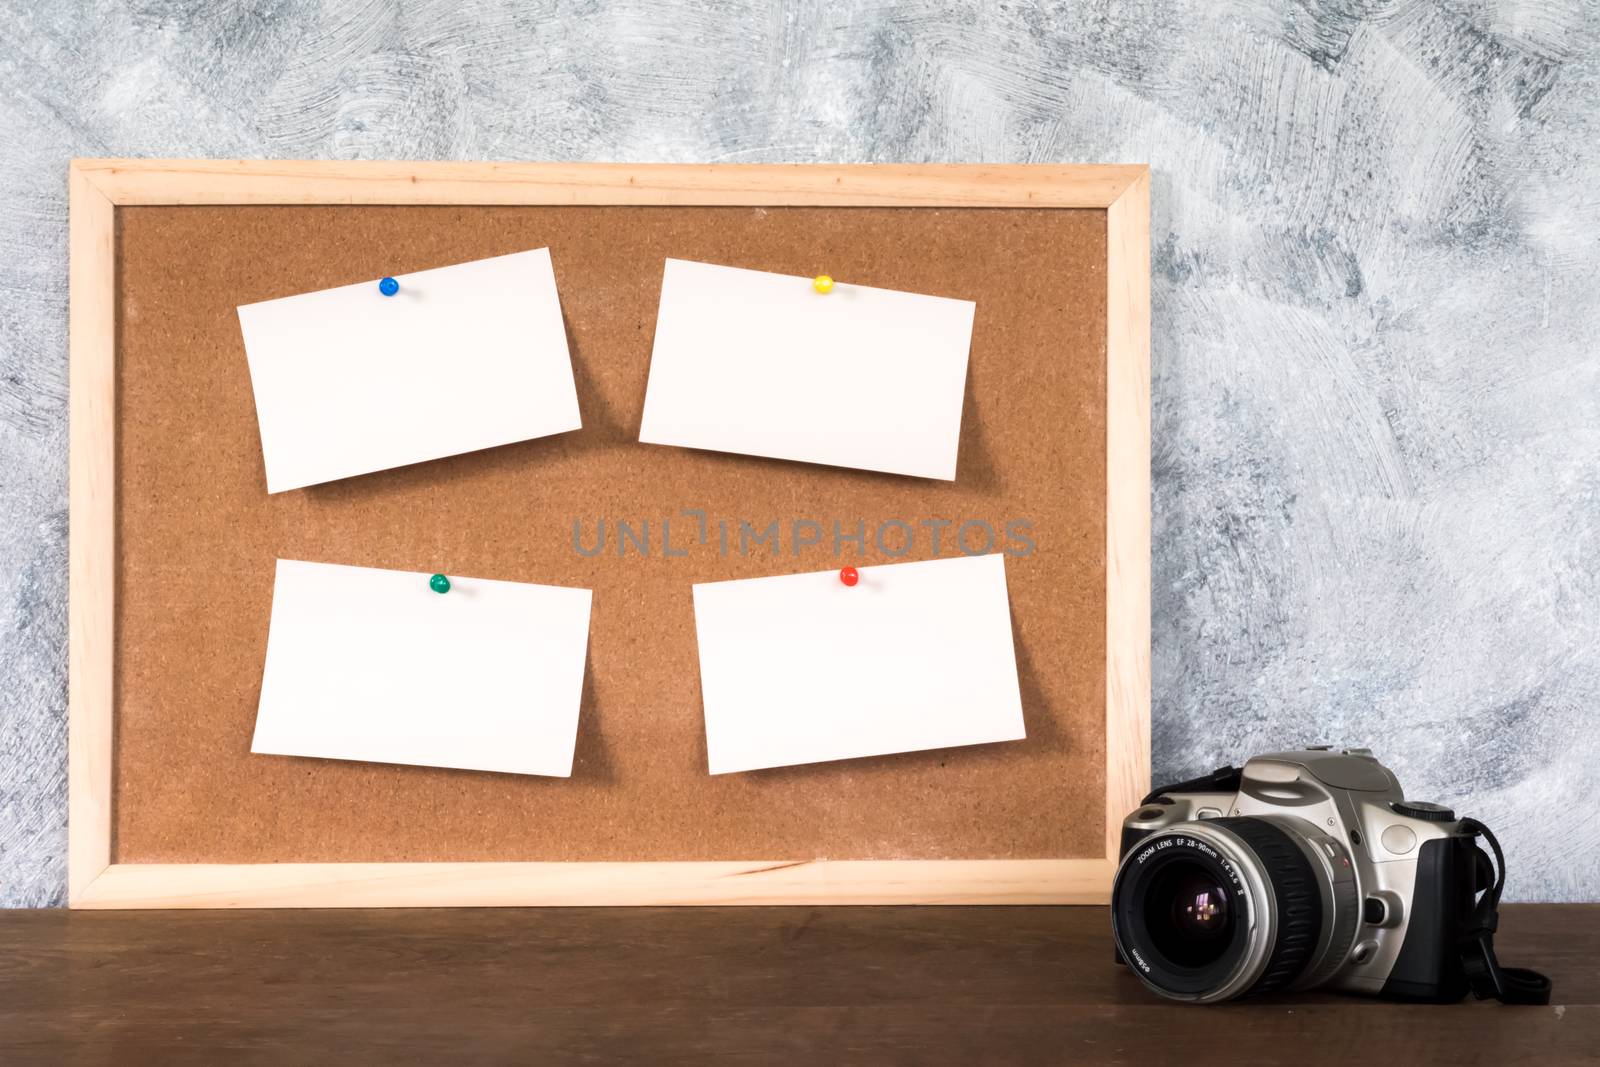 Blank papers pin up on cork board and camera over wooden table with textured background. by ronnarong